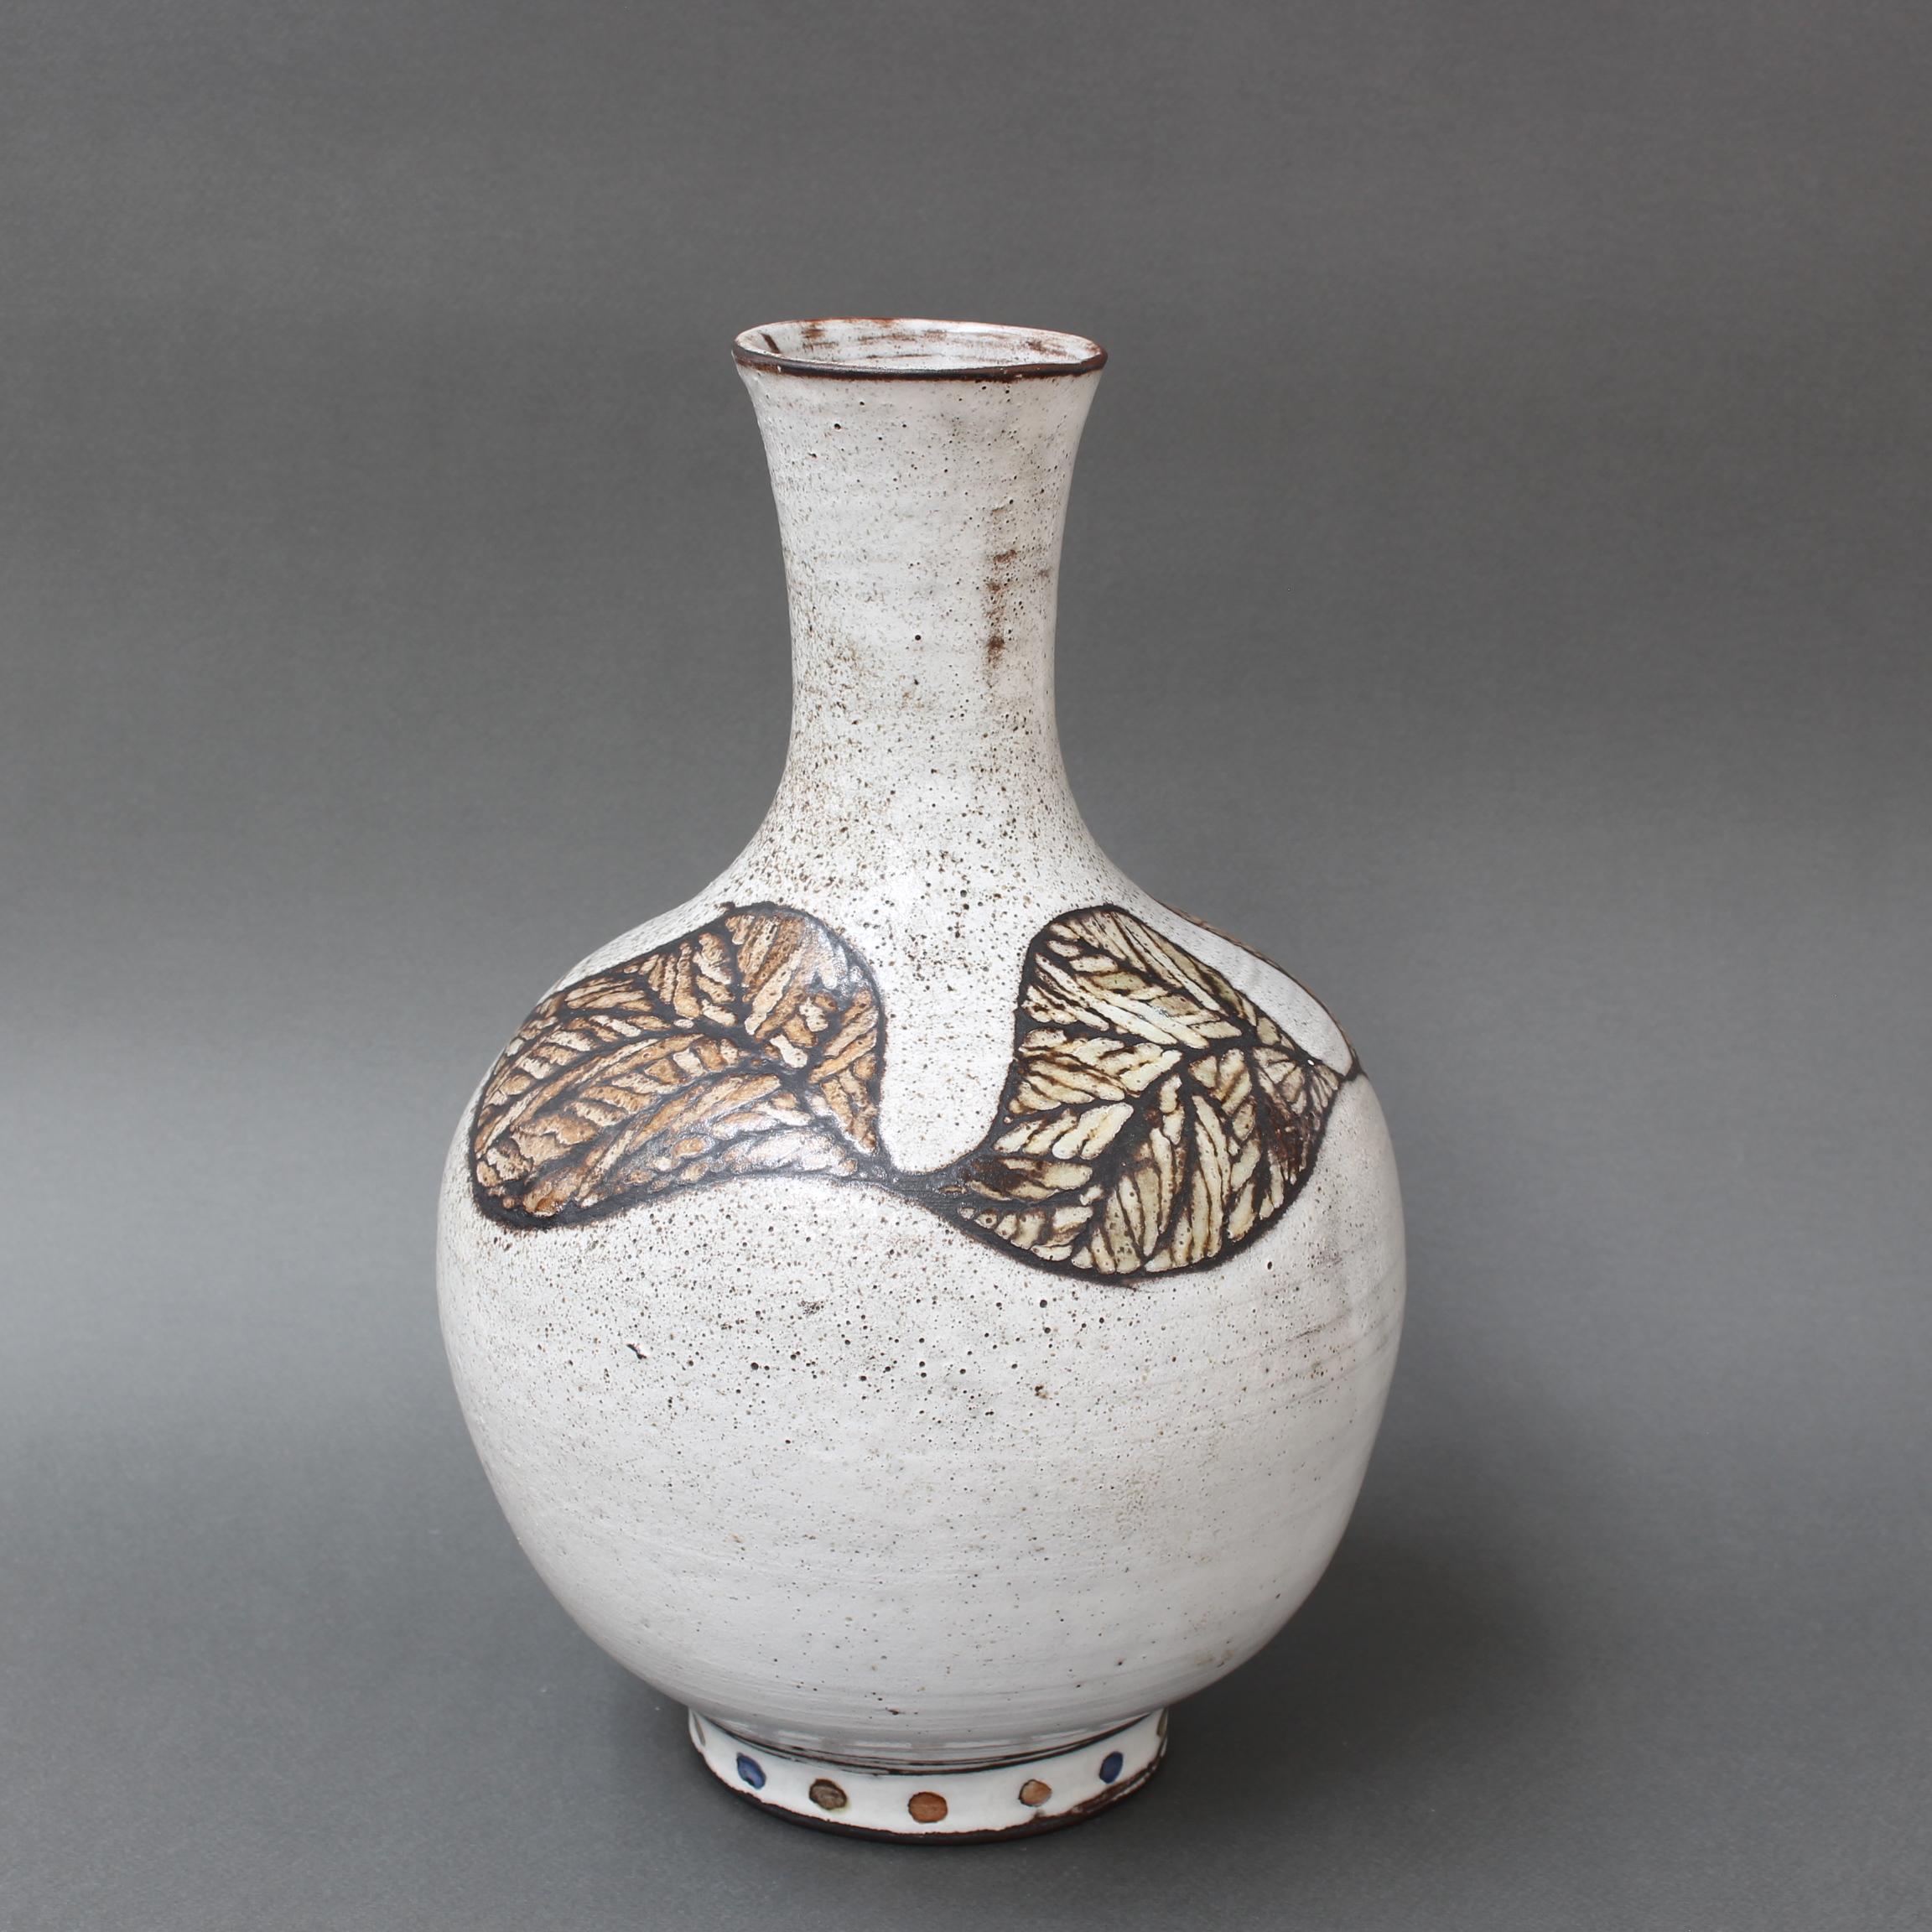 Vintage French ceramic vase by Paul Quéré (circa 1970s). A chalky-white base is accentuated with a stunning leaf motif, mosaic-like in its decoration. An elegant rounded body narrows to form a long, graceful neck. At the base is a smaller, round